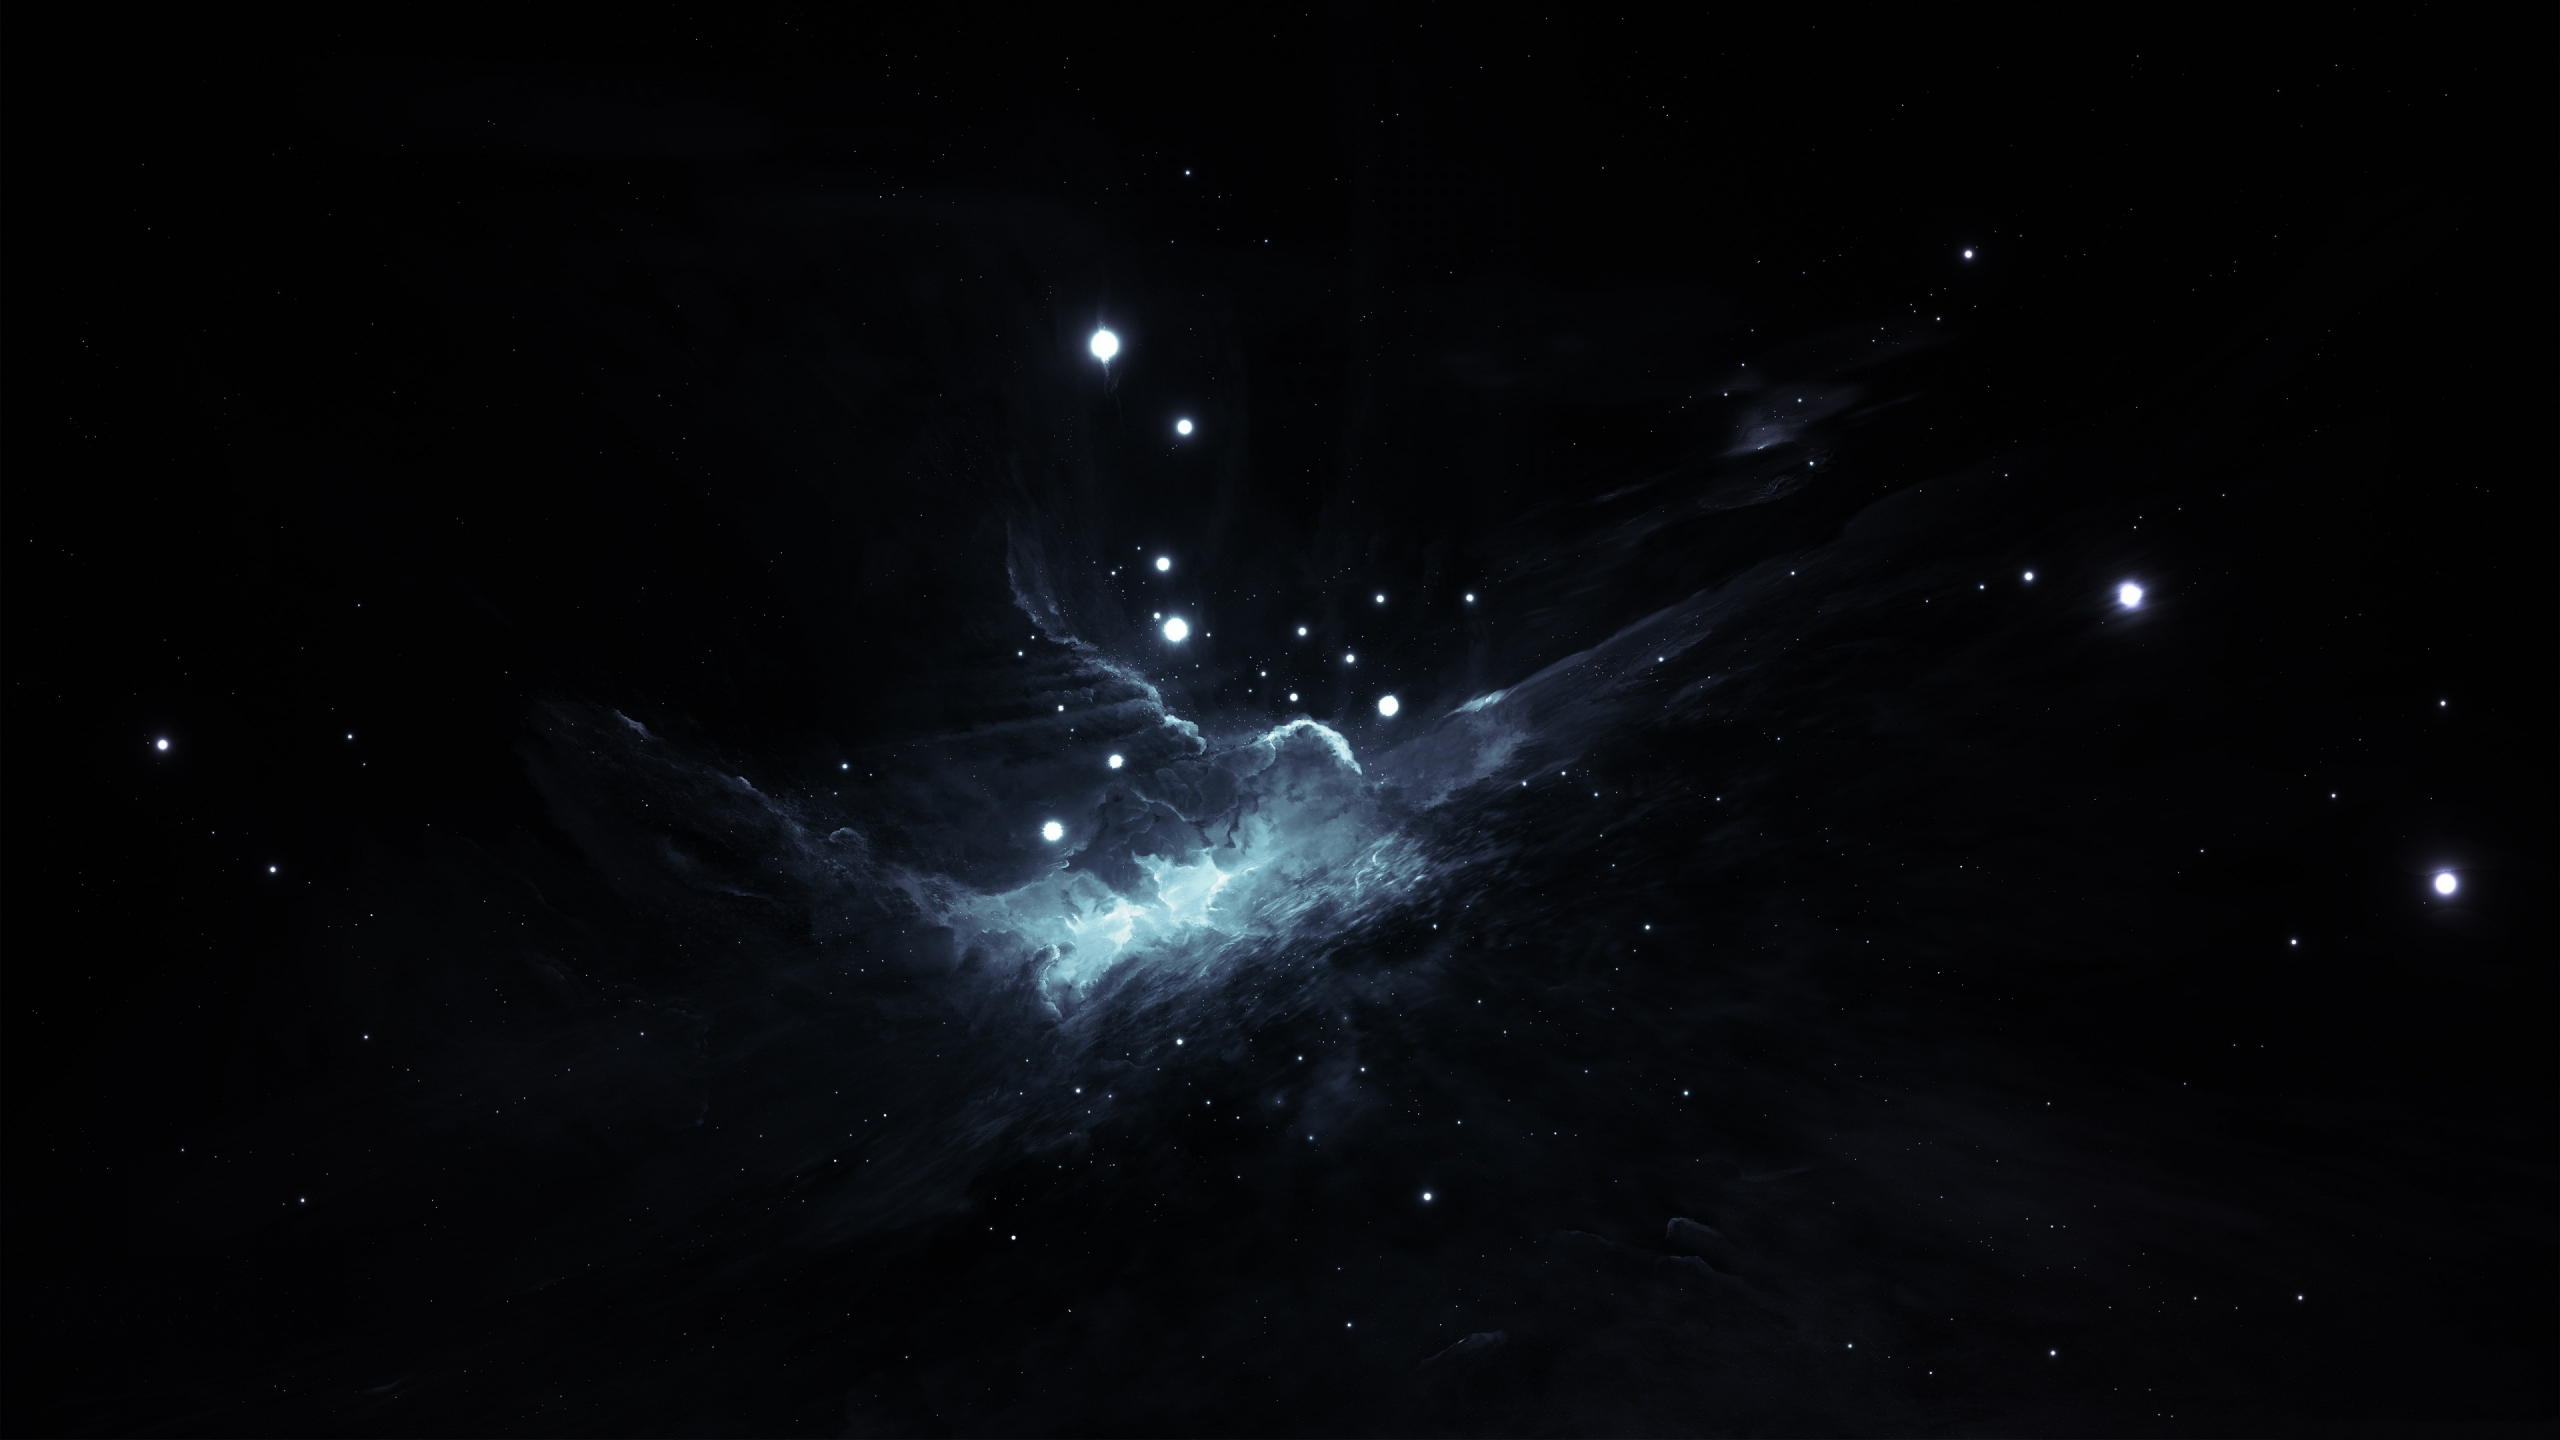 Download 2560x1440 wallpaper space, dark, clouds, galaxy, abstract